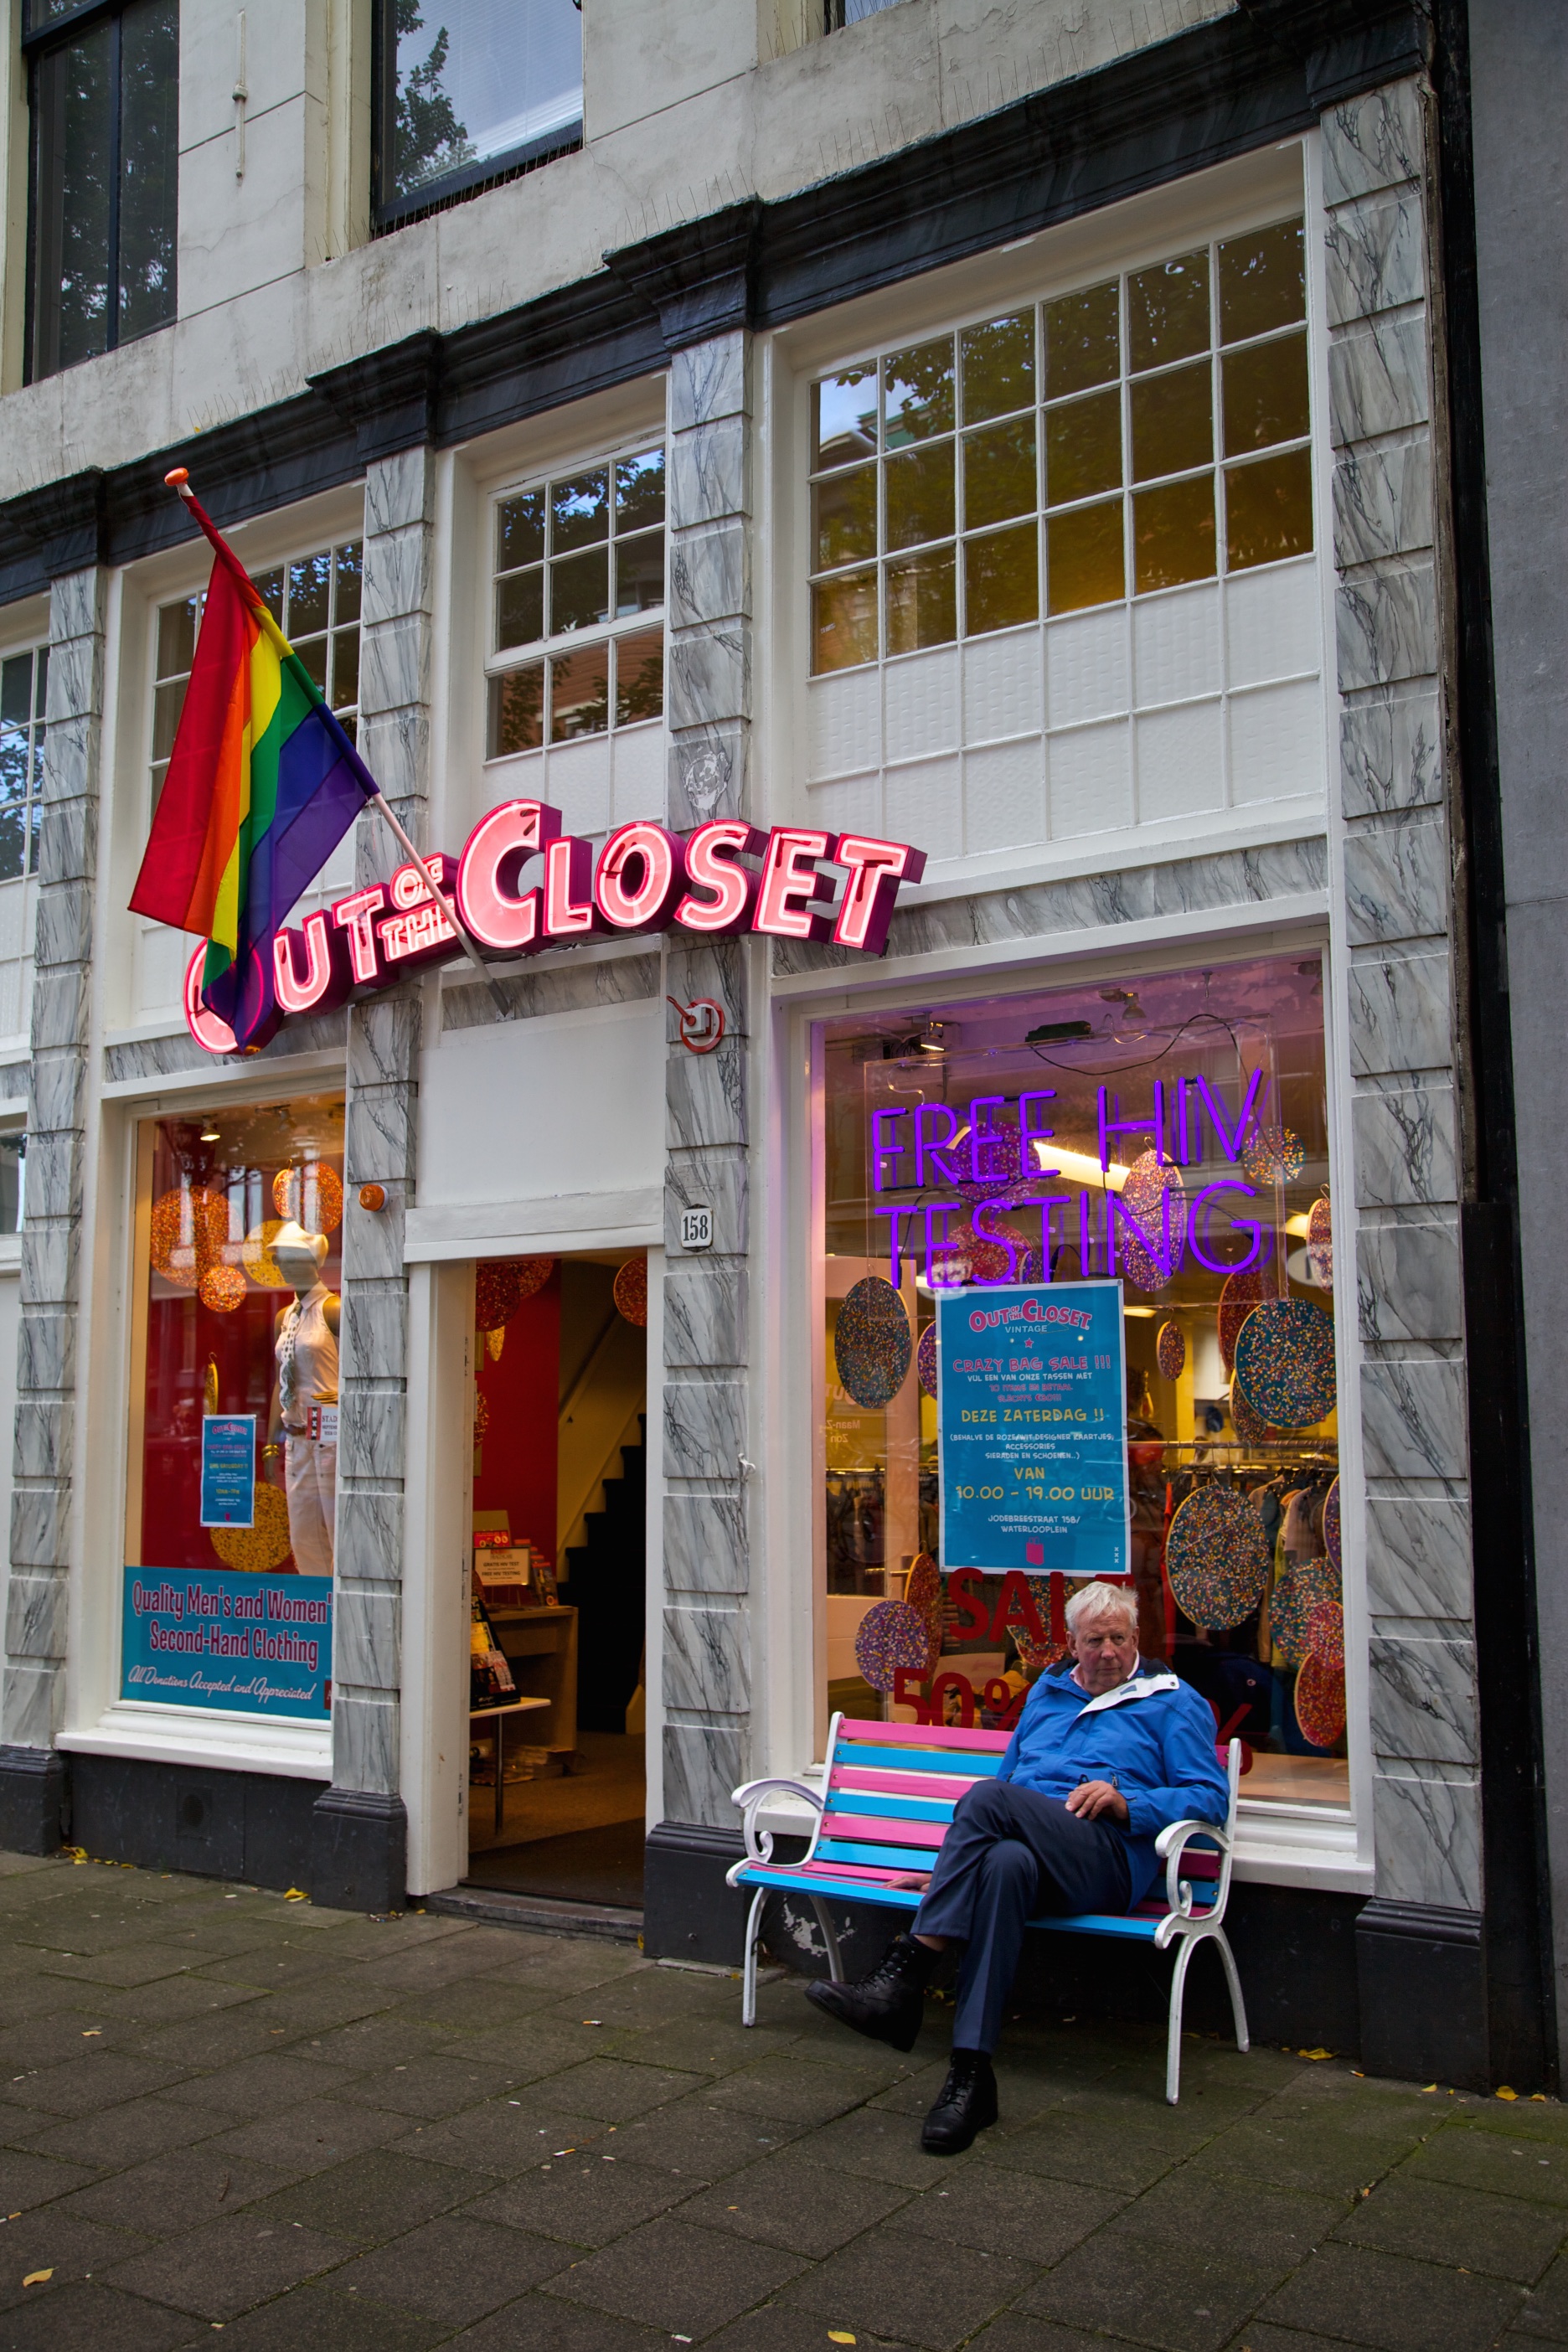 Out of the Closet. Amsterdam, Holland.